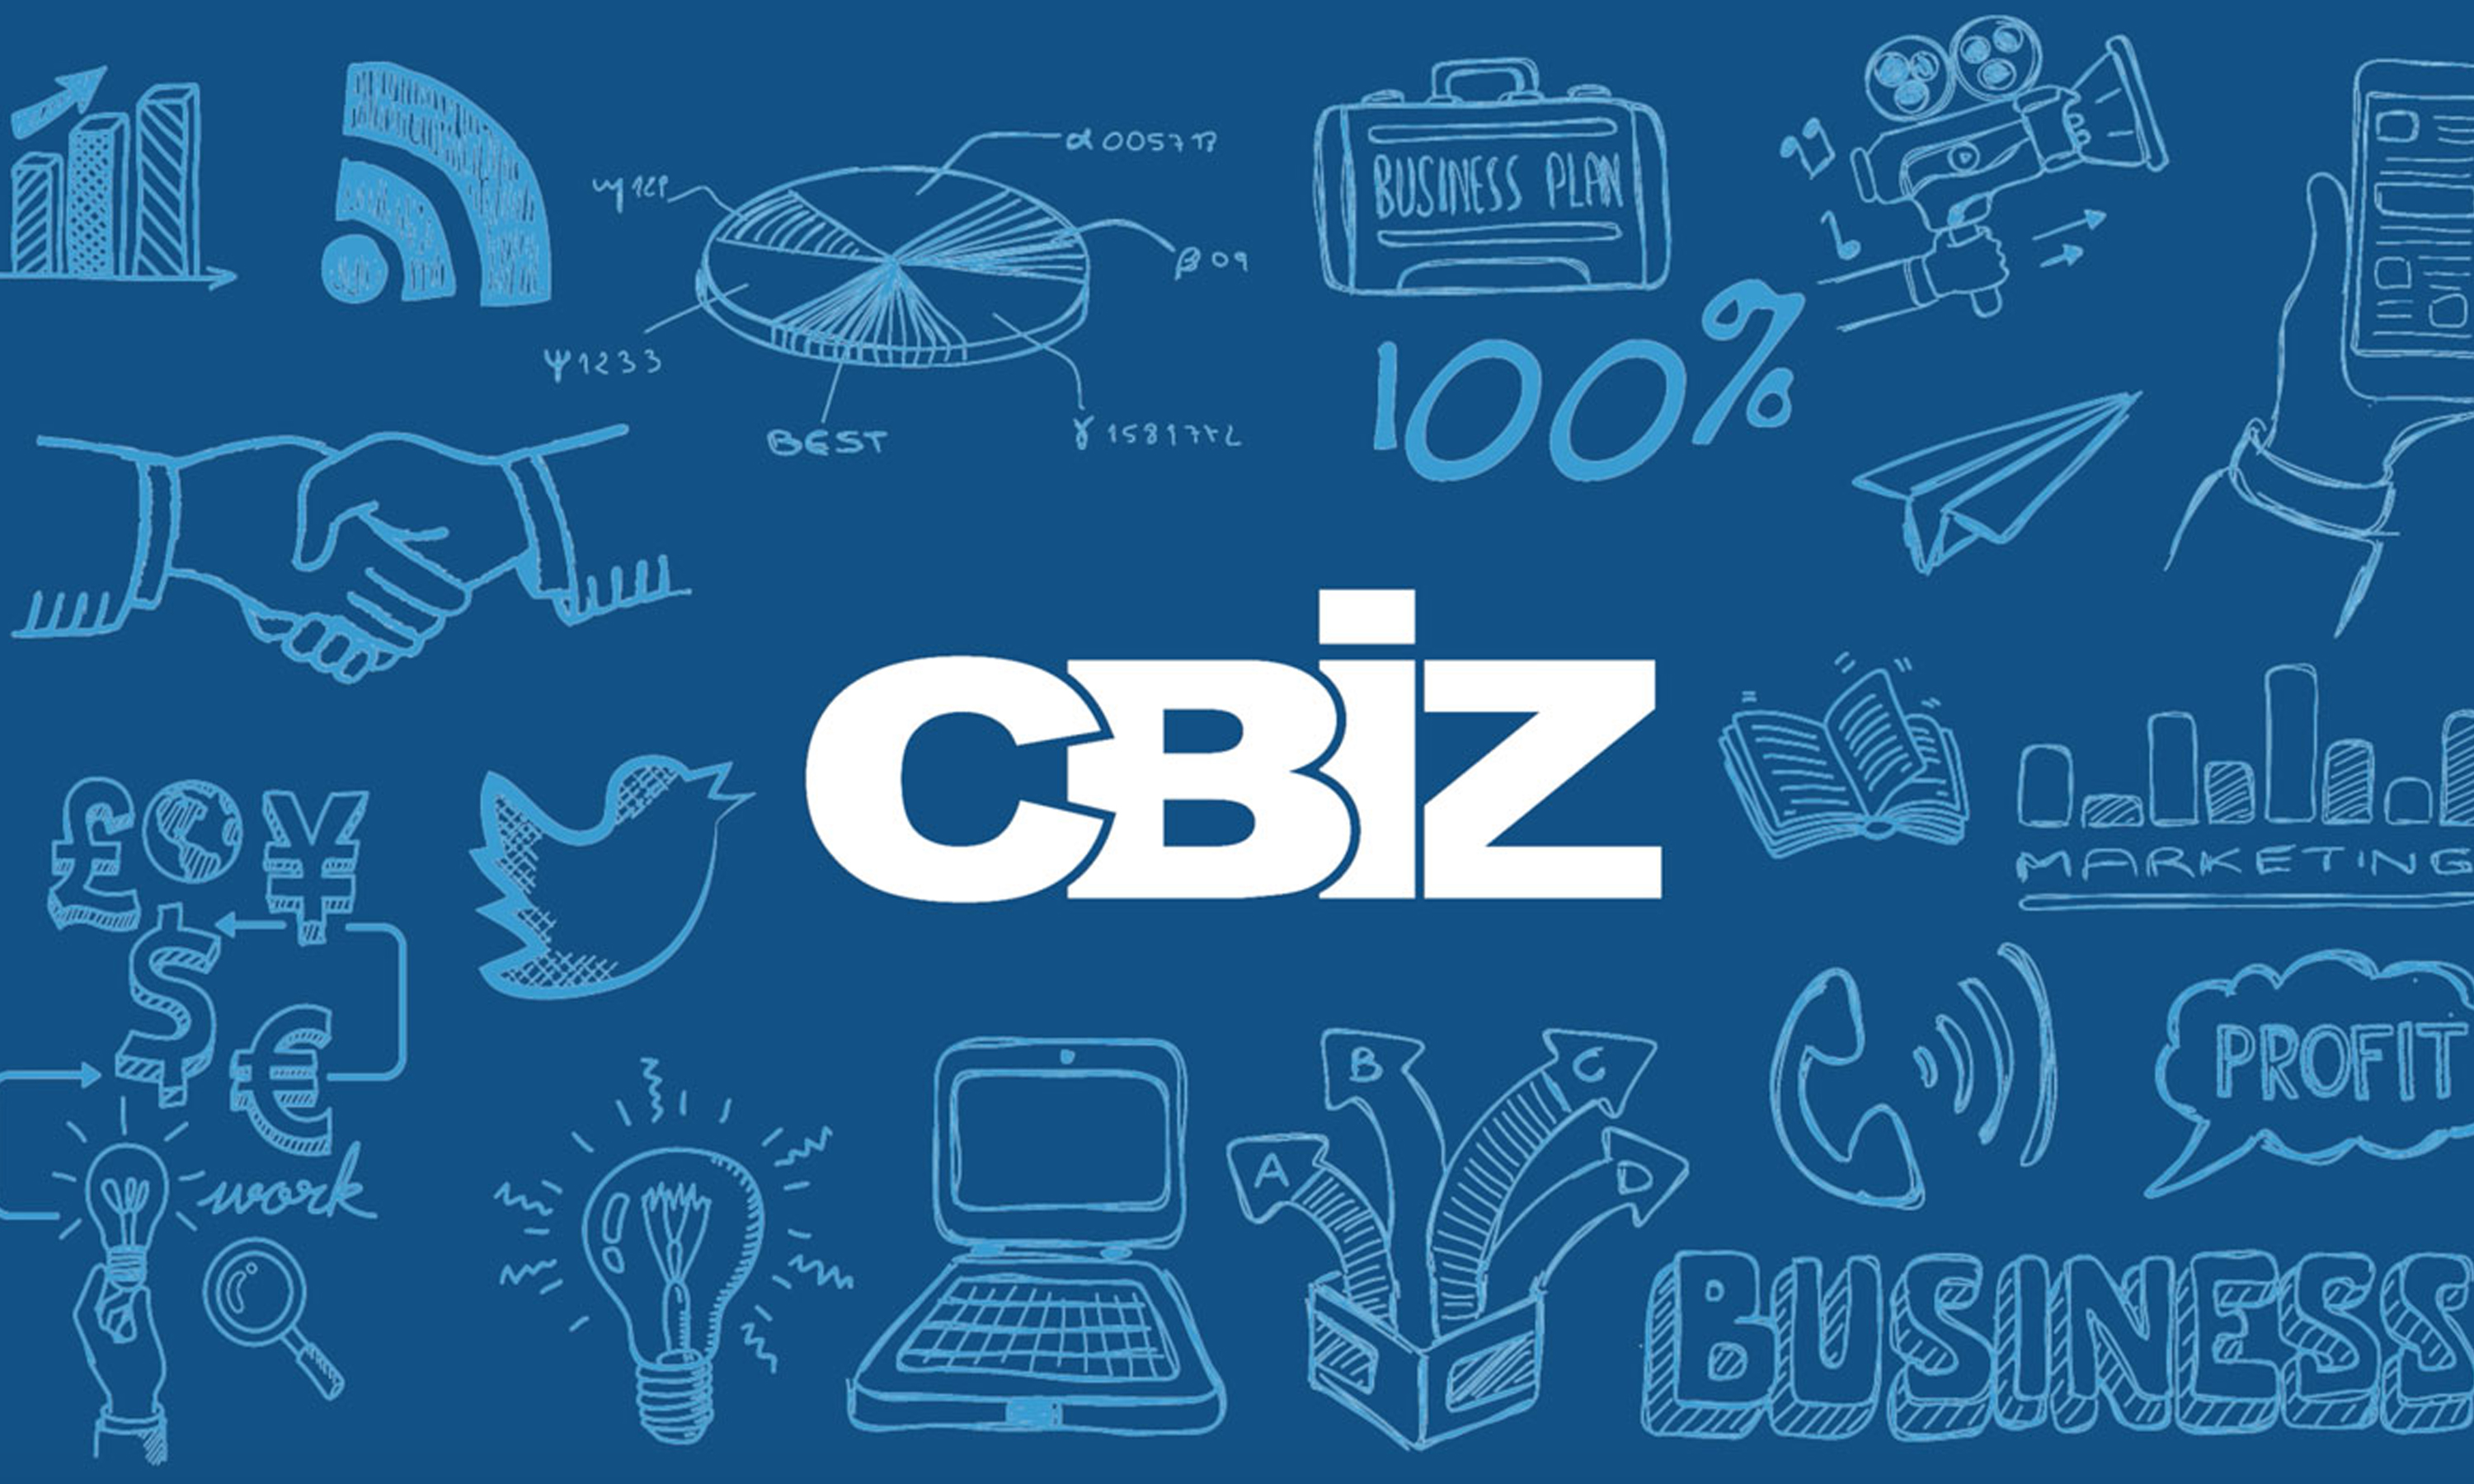 The word CBIZ in white on a blue background with various business and social media related icons in the background.